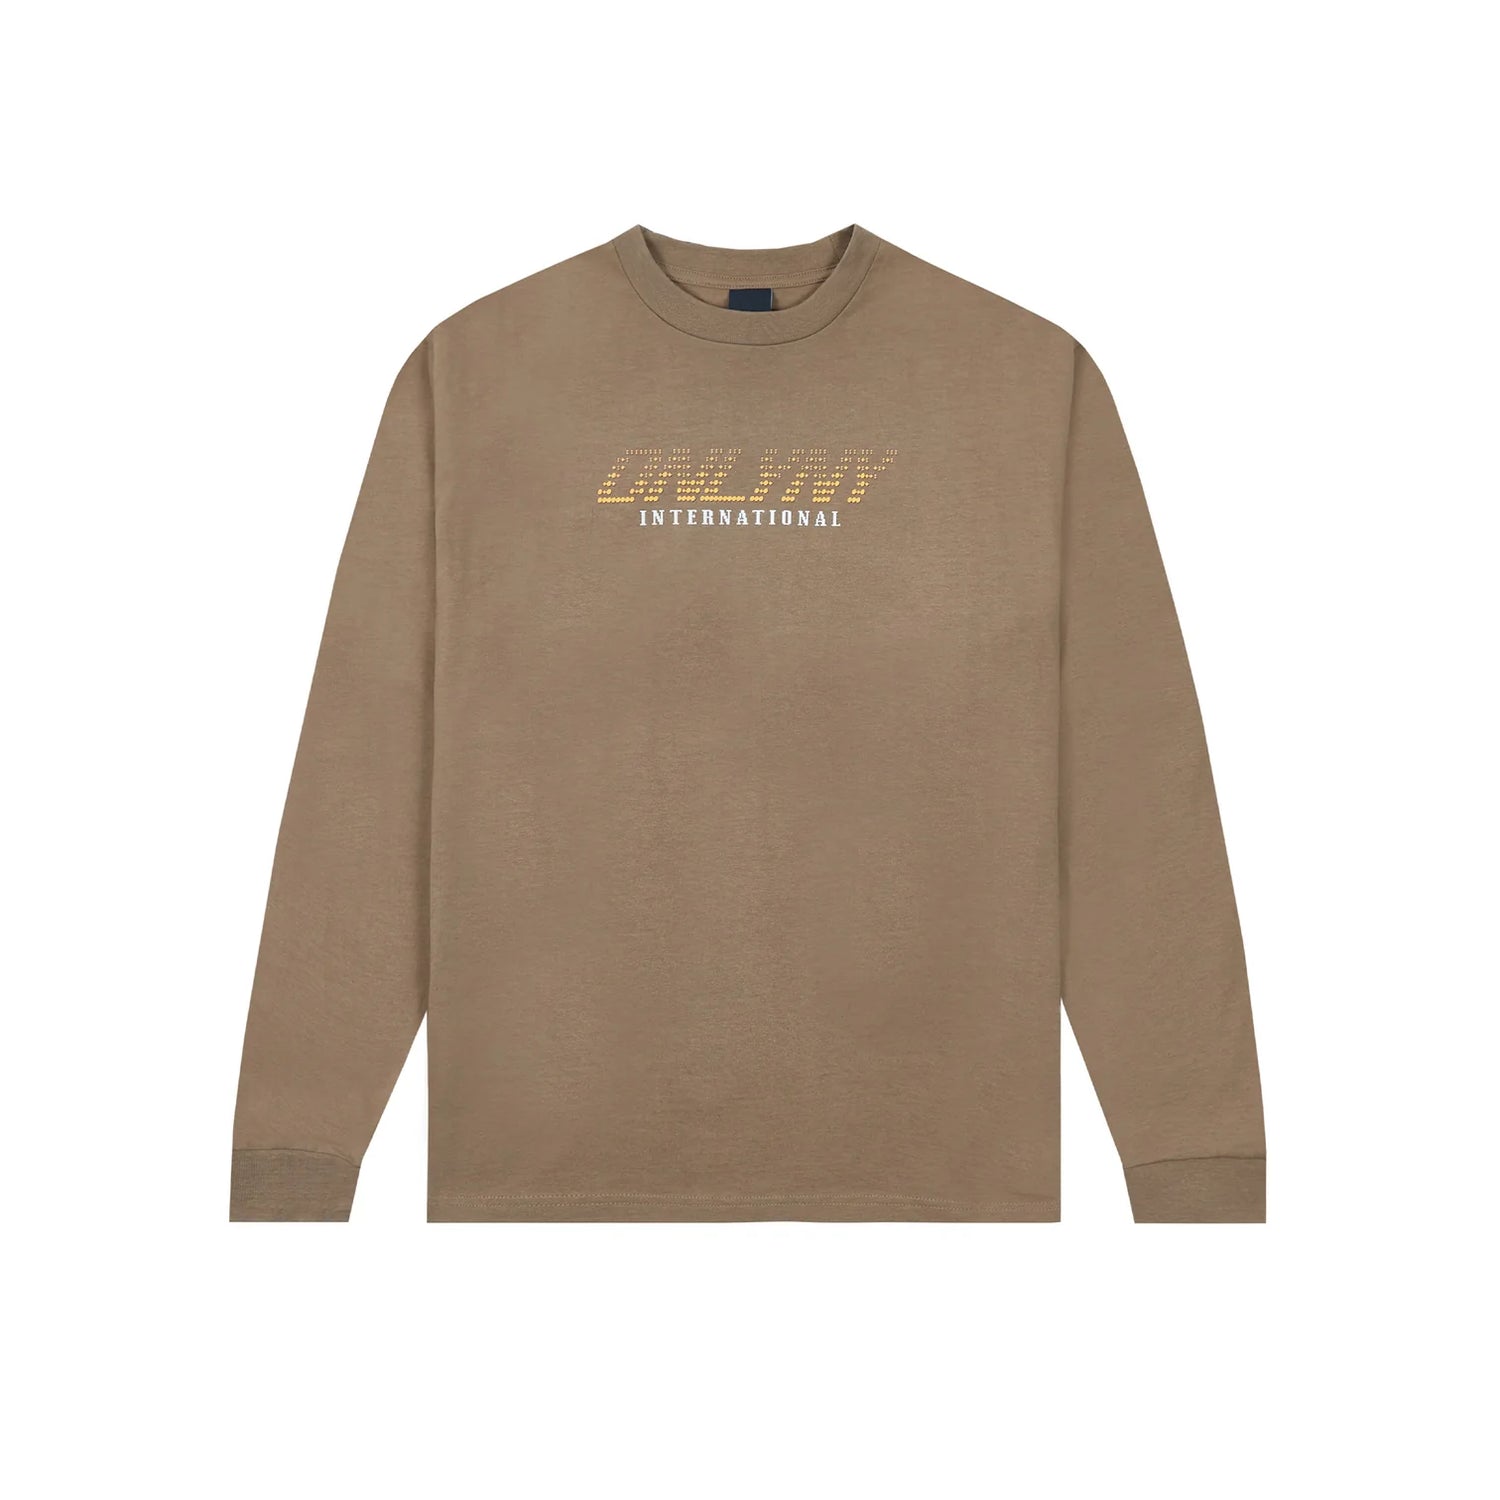 Only NY Earthbound Long Sleeve T-Shirt - Brown